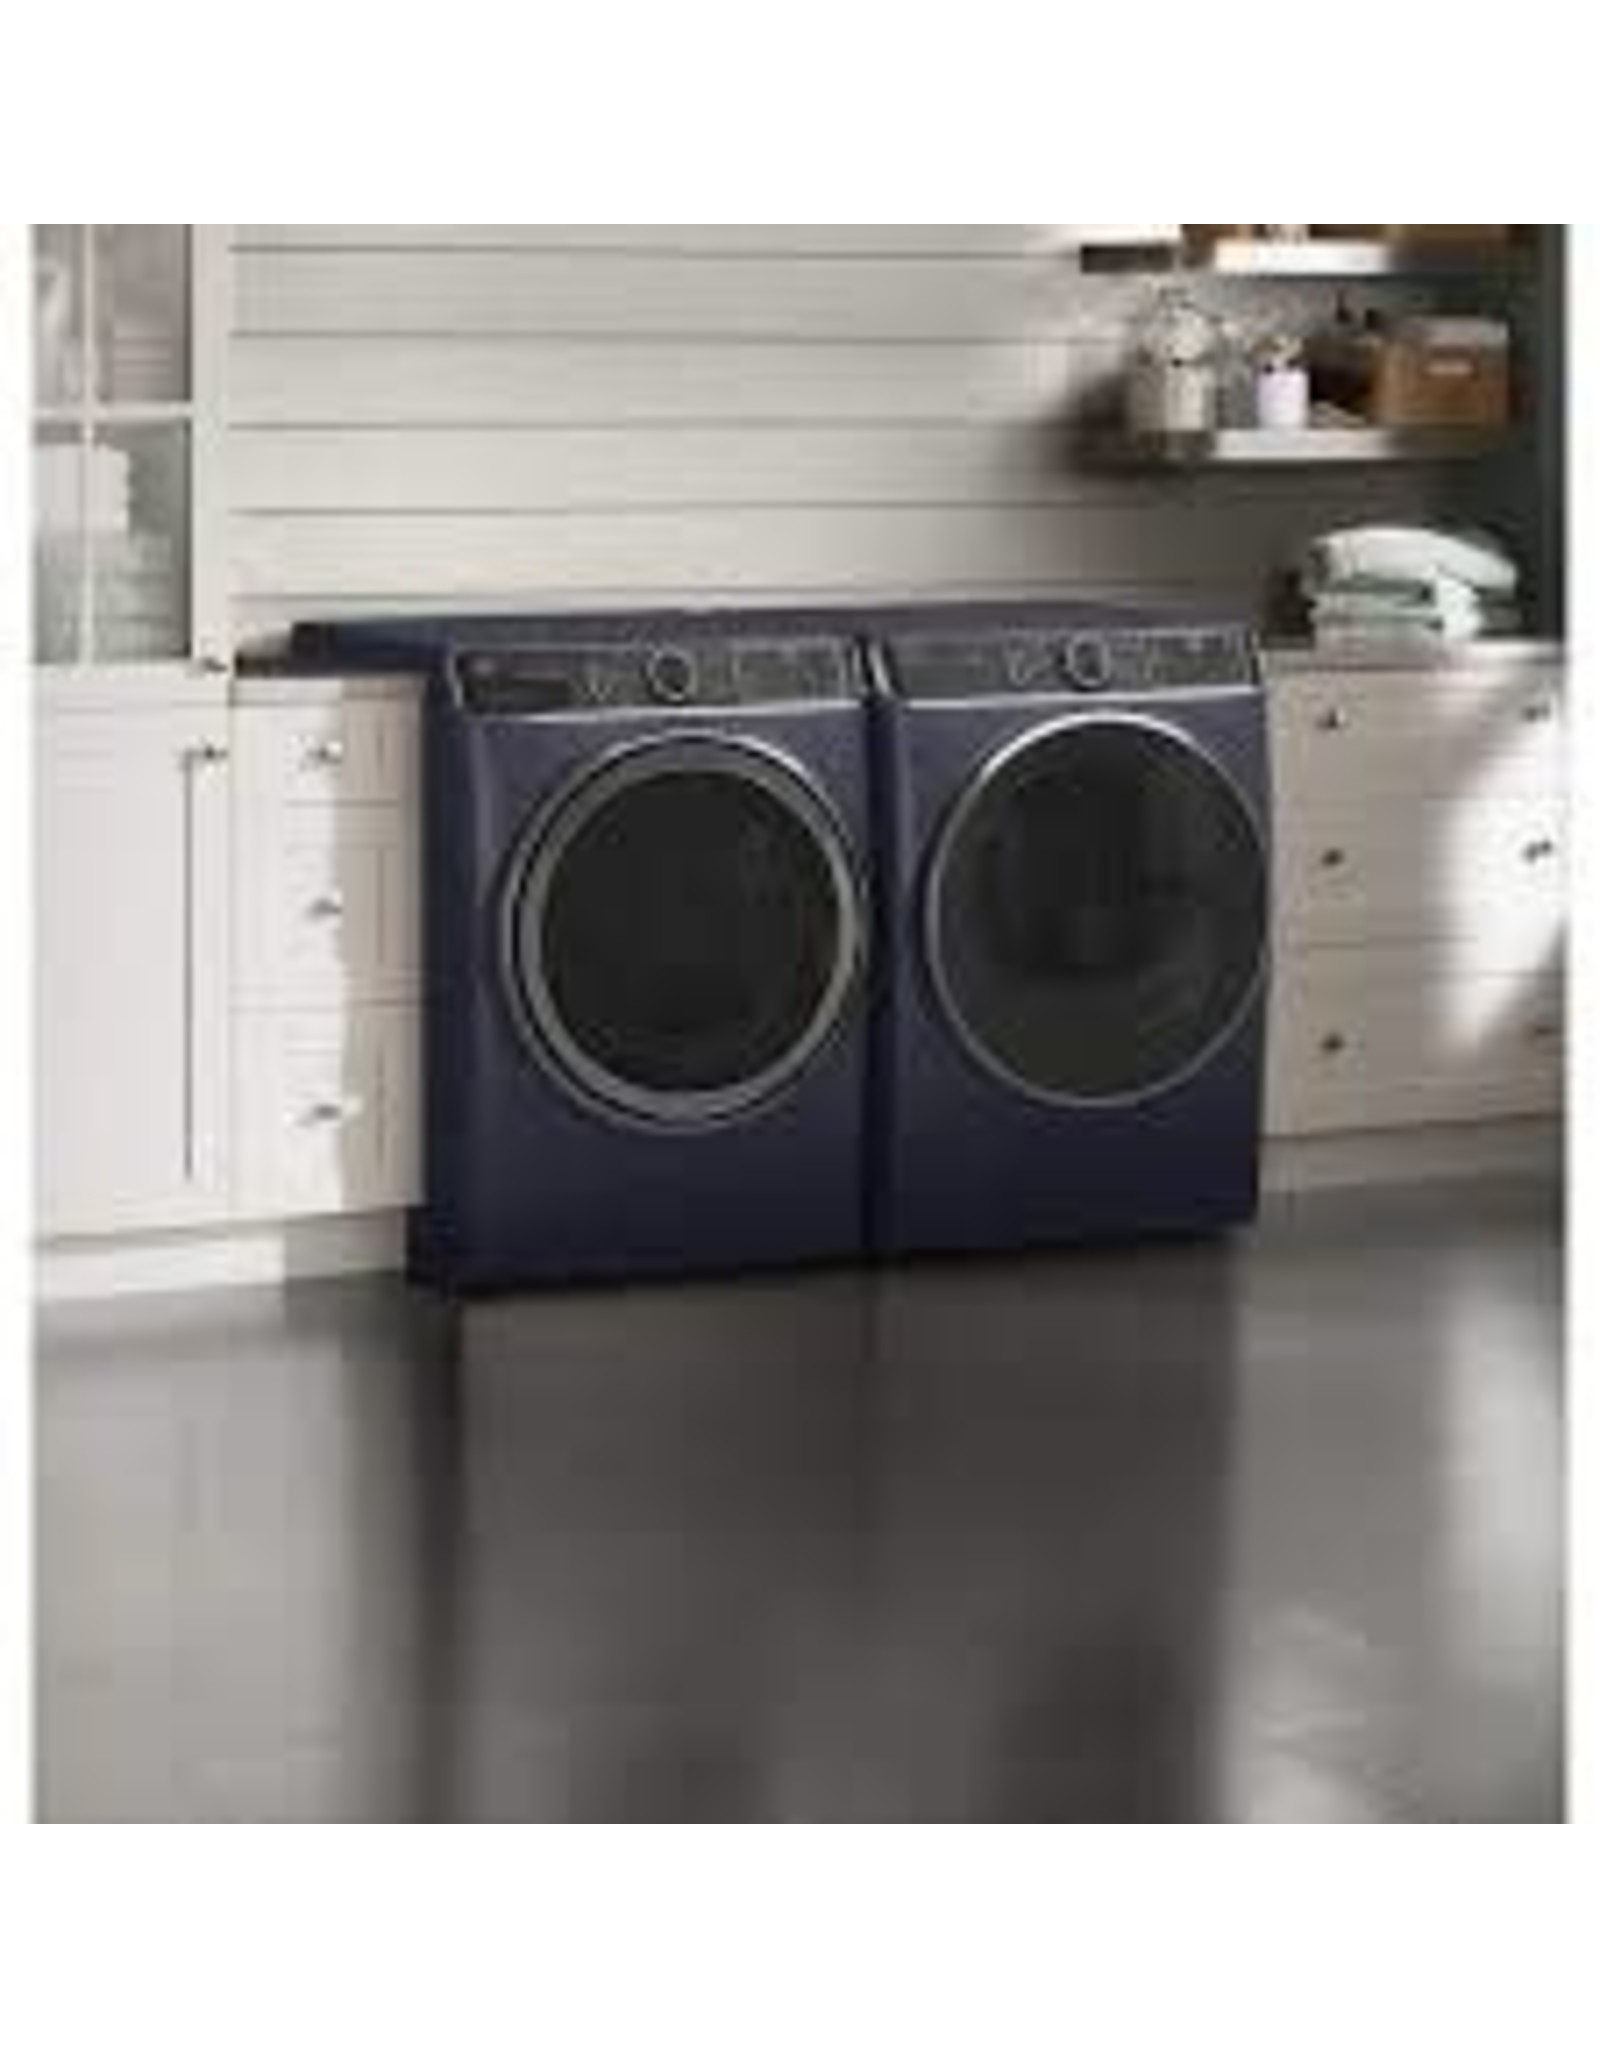 GE PROFILE GFD85ESPN1RS 7.8 cu. ft. Stackable Electric Dryer in Sapphire Blue with Sanitize Cycle, ENERGY STAR